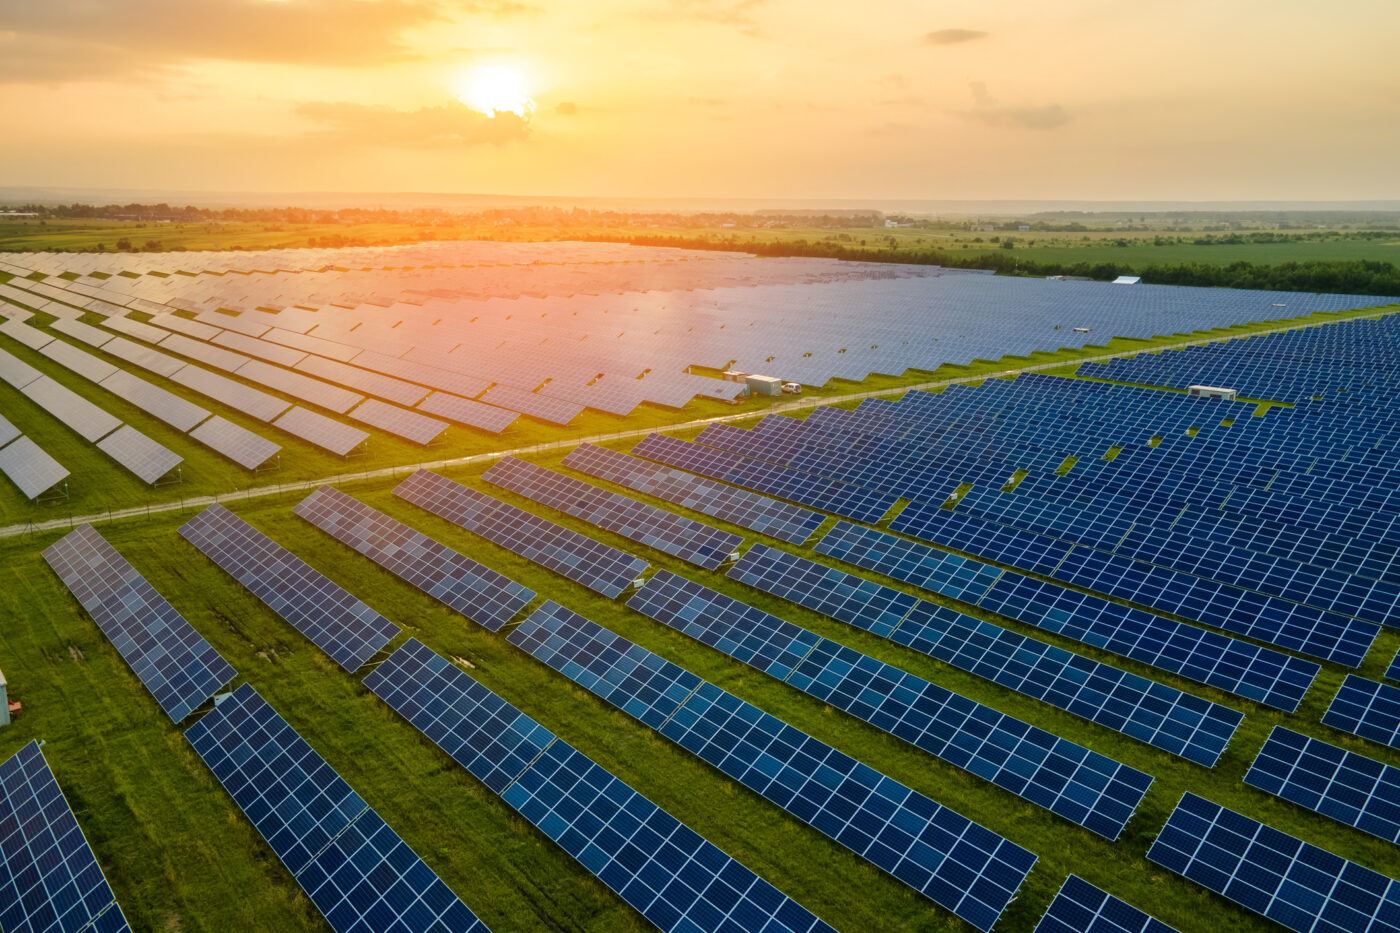 Aerial view of large sustainable electrical power plant with many rows of solar photovoltaic panels for producing clean electric energy in evening. Renewable electricity with zero emission concept.